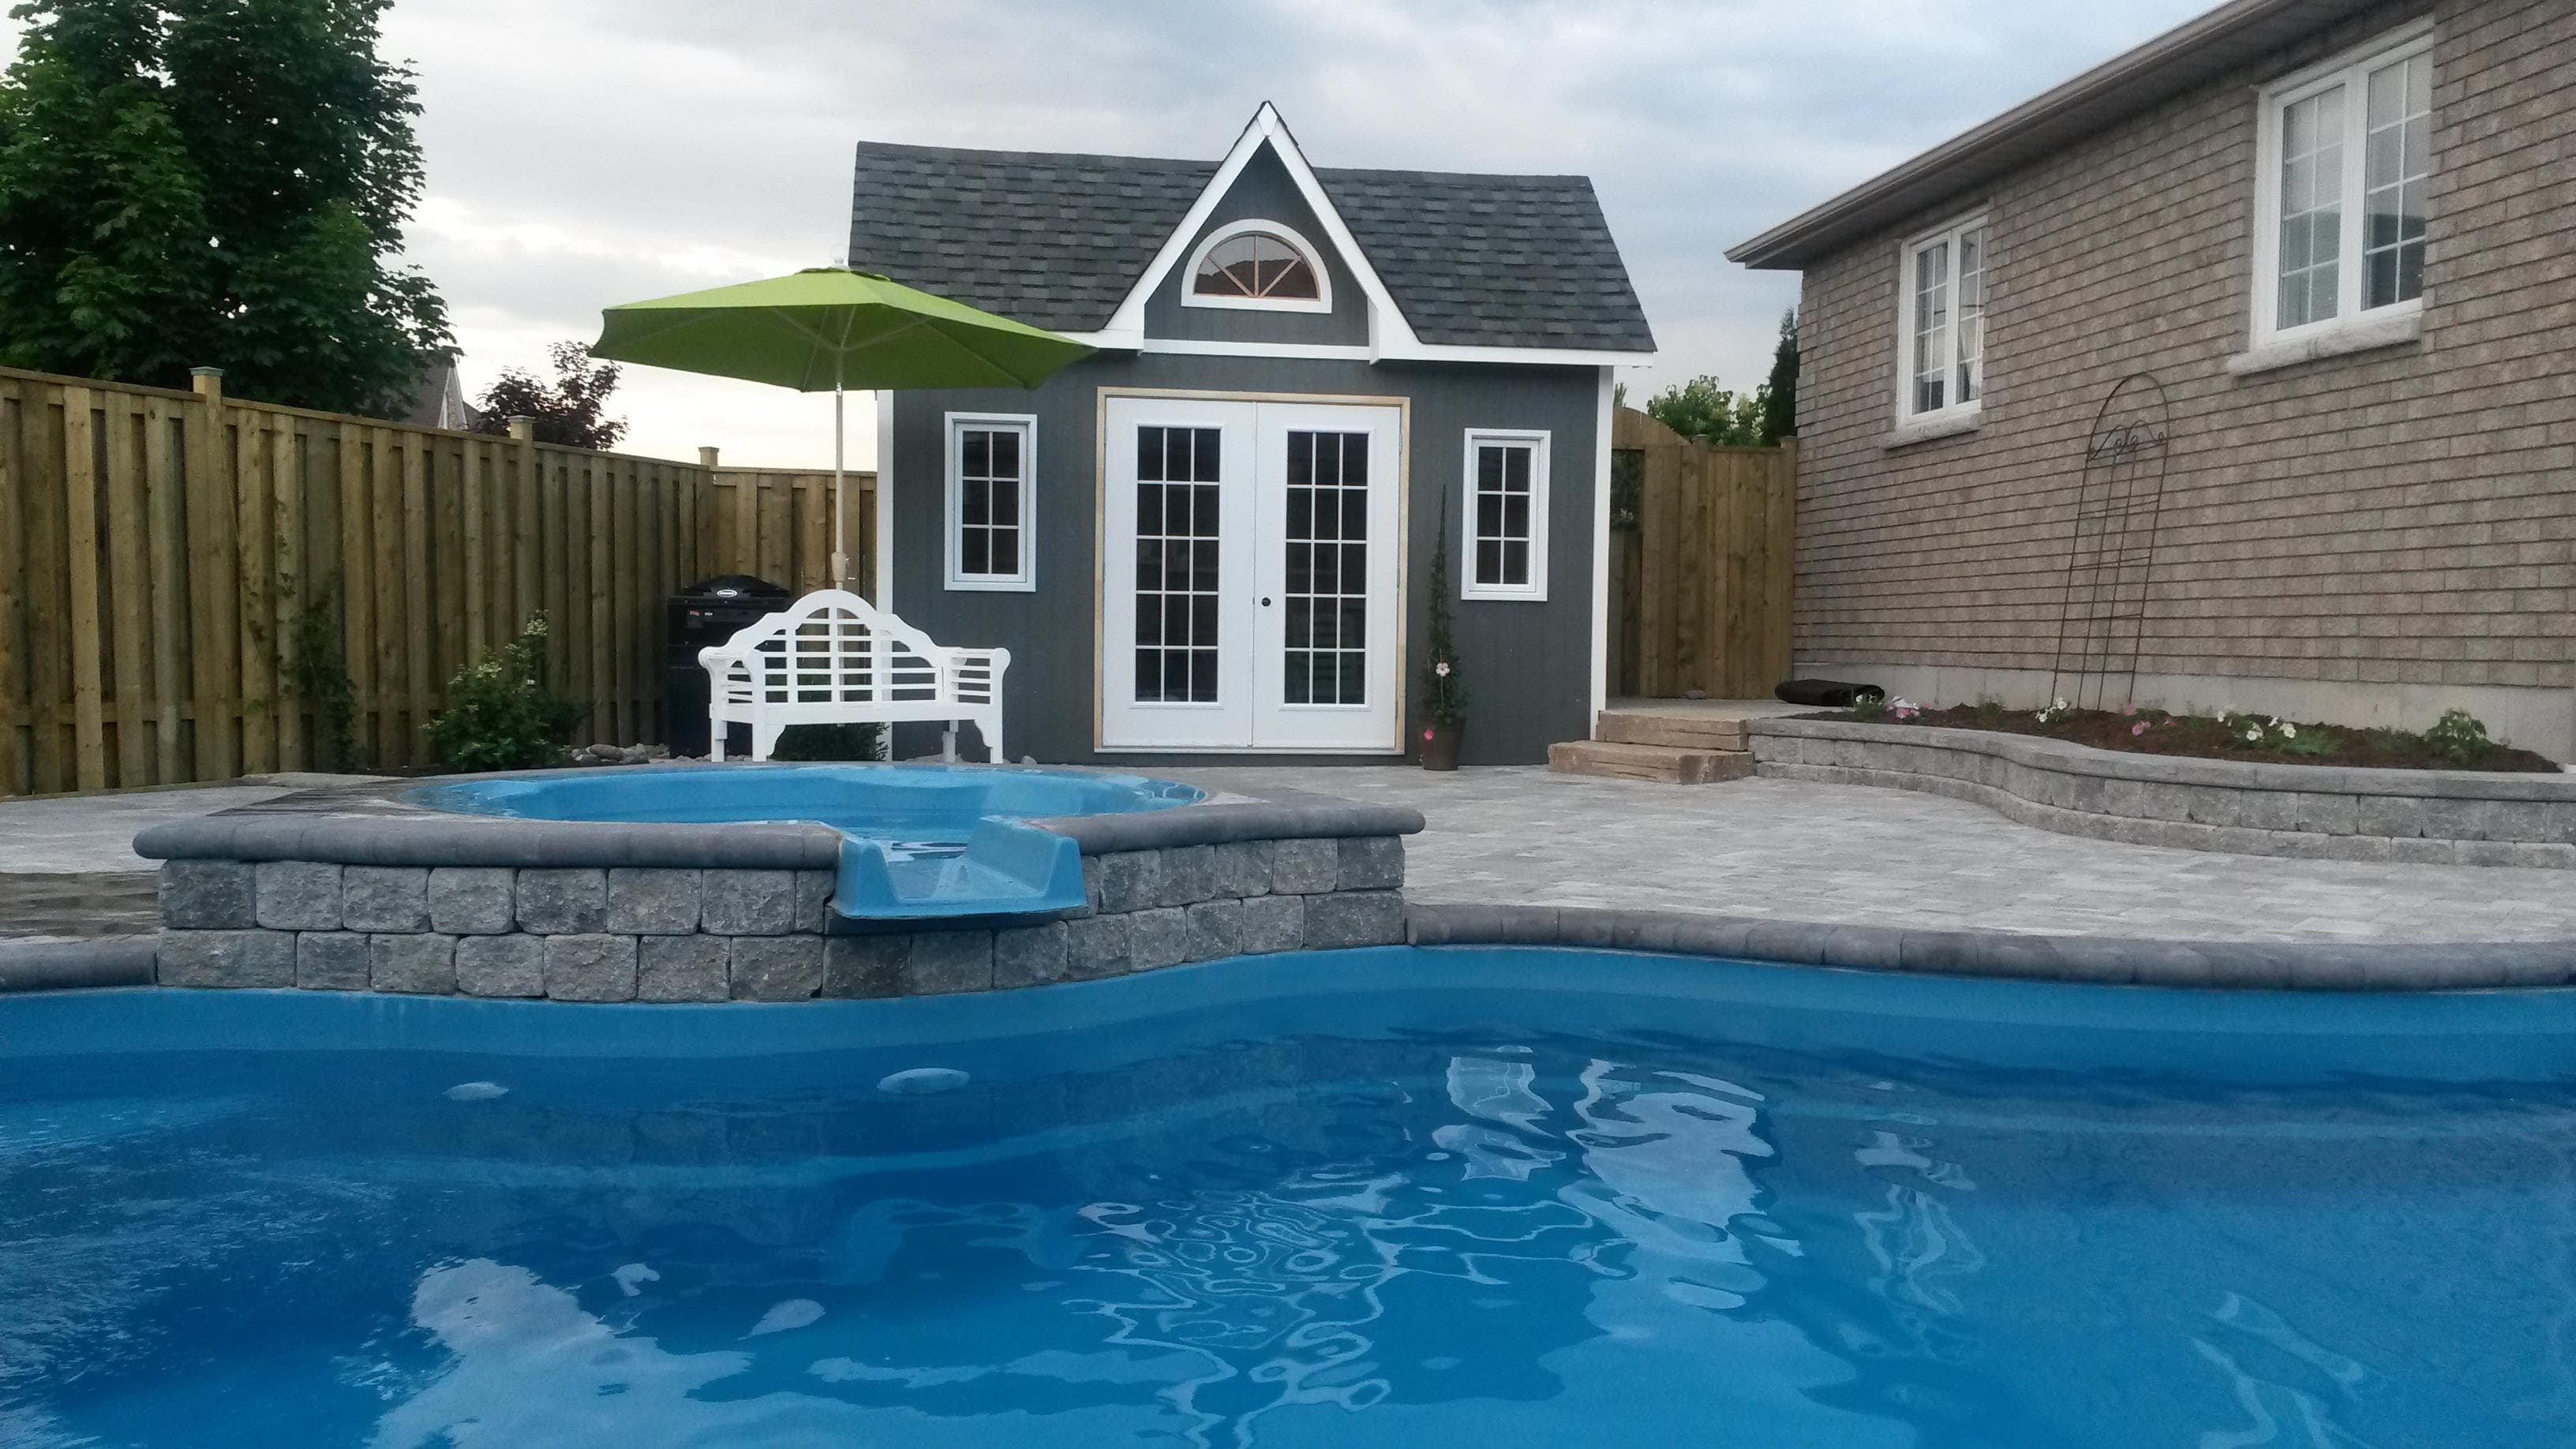 Copper Creek 14x14 pool house with double doors in Cobourg Ontario. ID number 178100-1